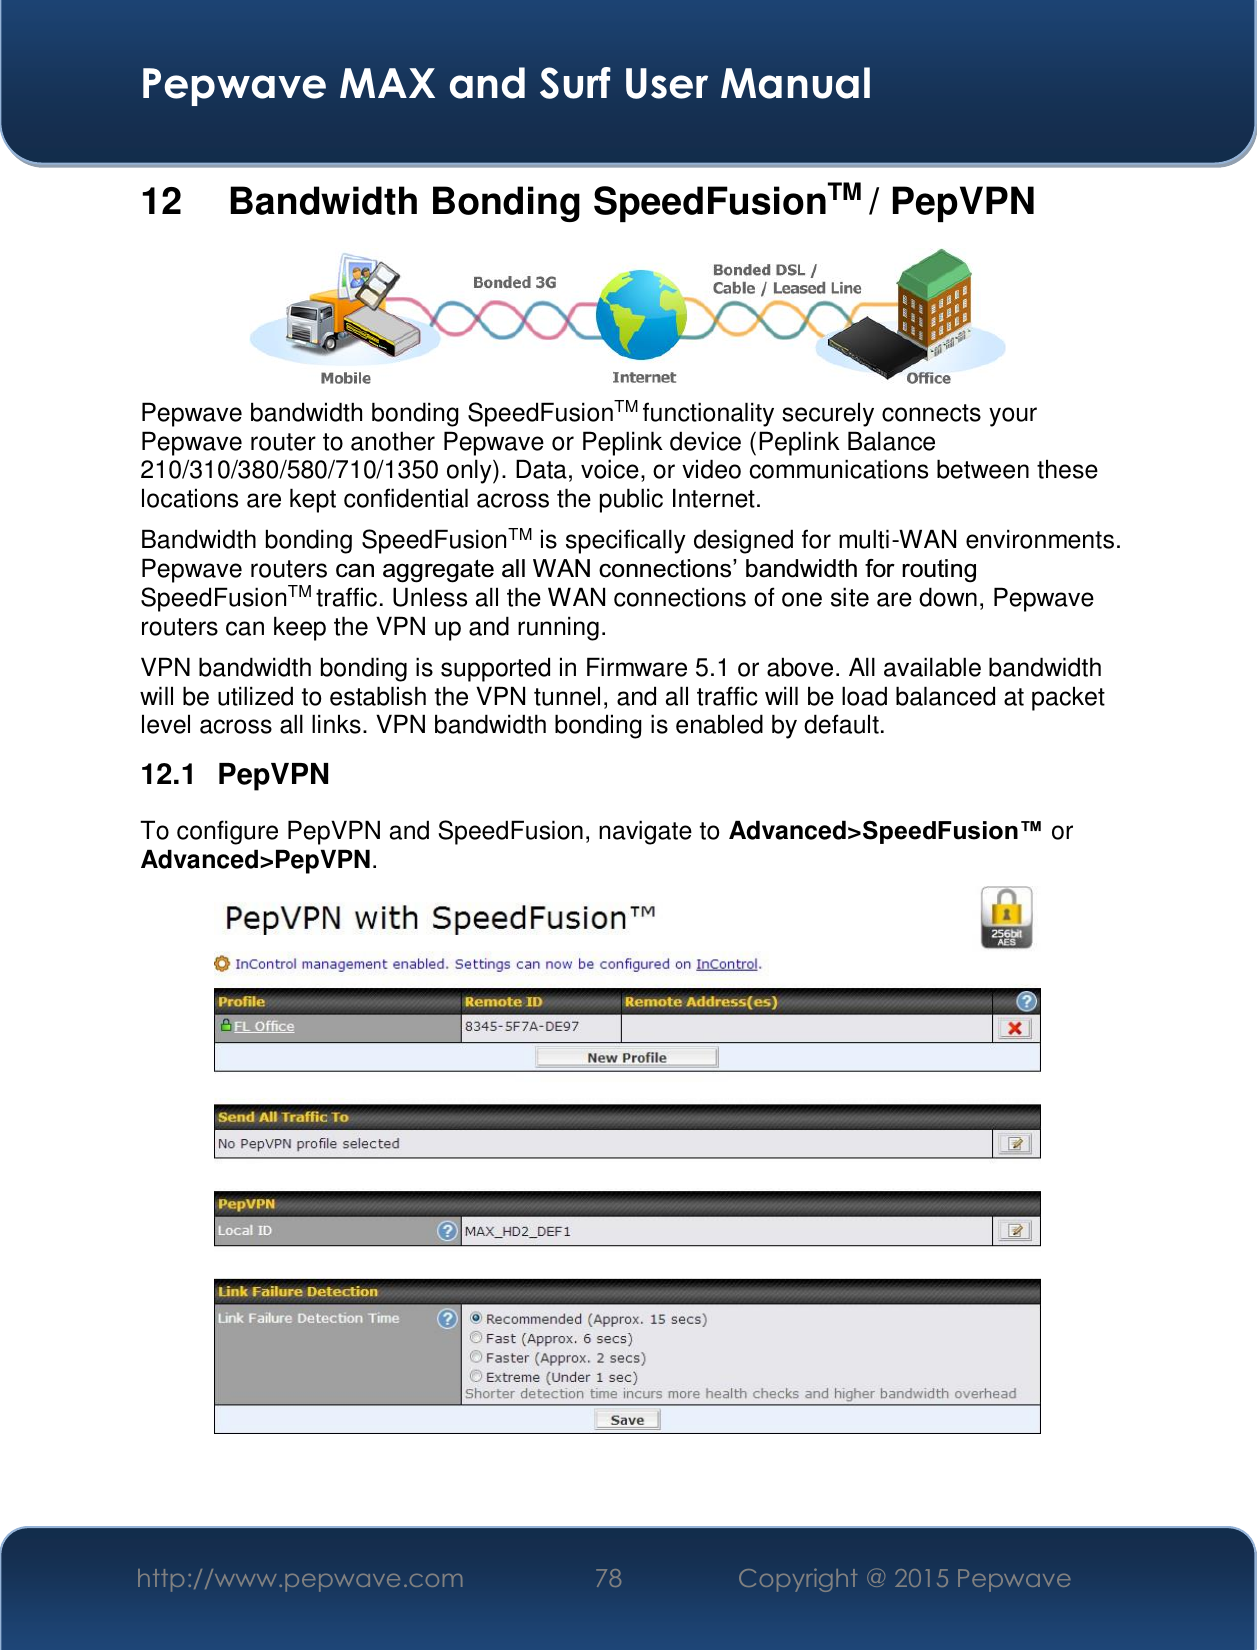  Pepwave MAX and Surf User Manual http://www.pepwave.com  78    Copyright @ 2015 Pepwave   12   Bandwidth Bonding SpeedFusionTM / PepVPN  Pepwave bandwidth bonding SpeedFusionTM functionality securely connects your Pepwave router to another Pepwave or Peplink device (Peplink Balance 210/310/380/580/710/1350 only). Data, voice, or video communications between these locations are kept confidential across the public Internet. Bandwidth bonding SpeedFusionTM is specifically designed for multi-WAN environments. Pepwave routers FDQDJJUHJDWHDOO:$1FRQQHFWLRQV¶EDQGZLGWKIRUURXWLQJSpeedFusionTM traffic. Unless all the WAN connections of one site are down, Pepwave routers can keep the VPN up and running. VPN bandwidth bonding is supported in Firmware 5.1 or above. All available bandwidth will be utilized to establish the VPN tunnel, and all traffic will be load balanced at packet level across all links. VPN bandwidth bonding is enabled by default.  12.1 PepVPN To configure PepVPN and SpeedFusion, navigate to Advanced&gt;6SHHG)XVLRQor Advanced&gt;PepVPN.    